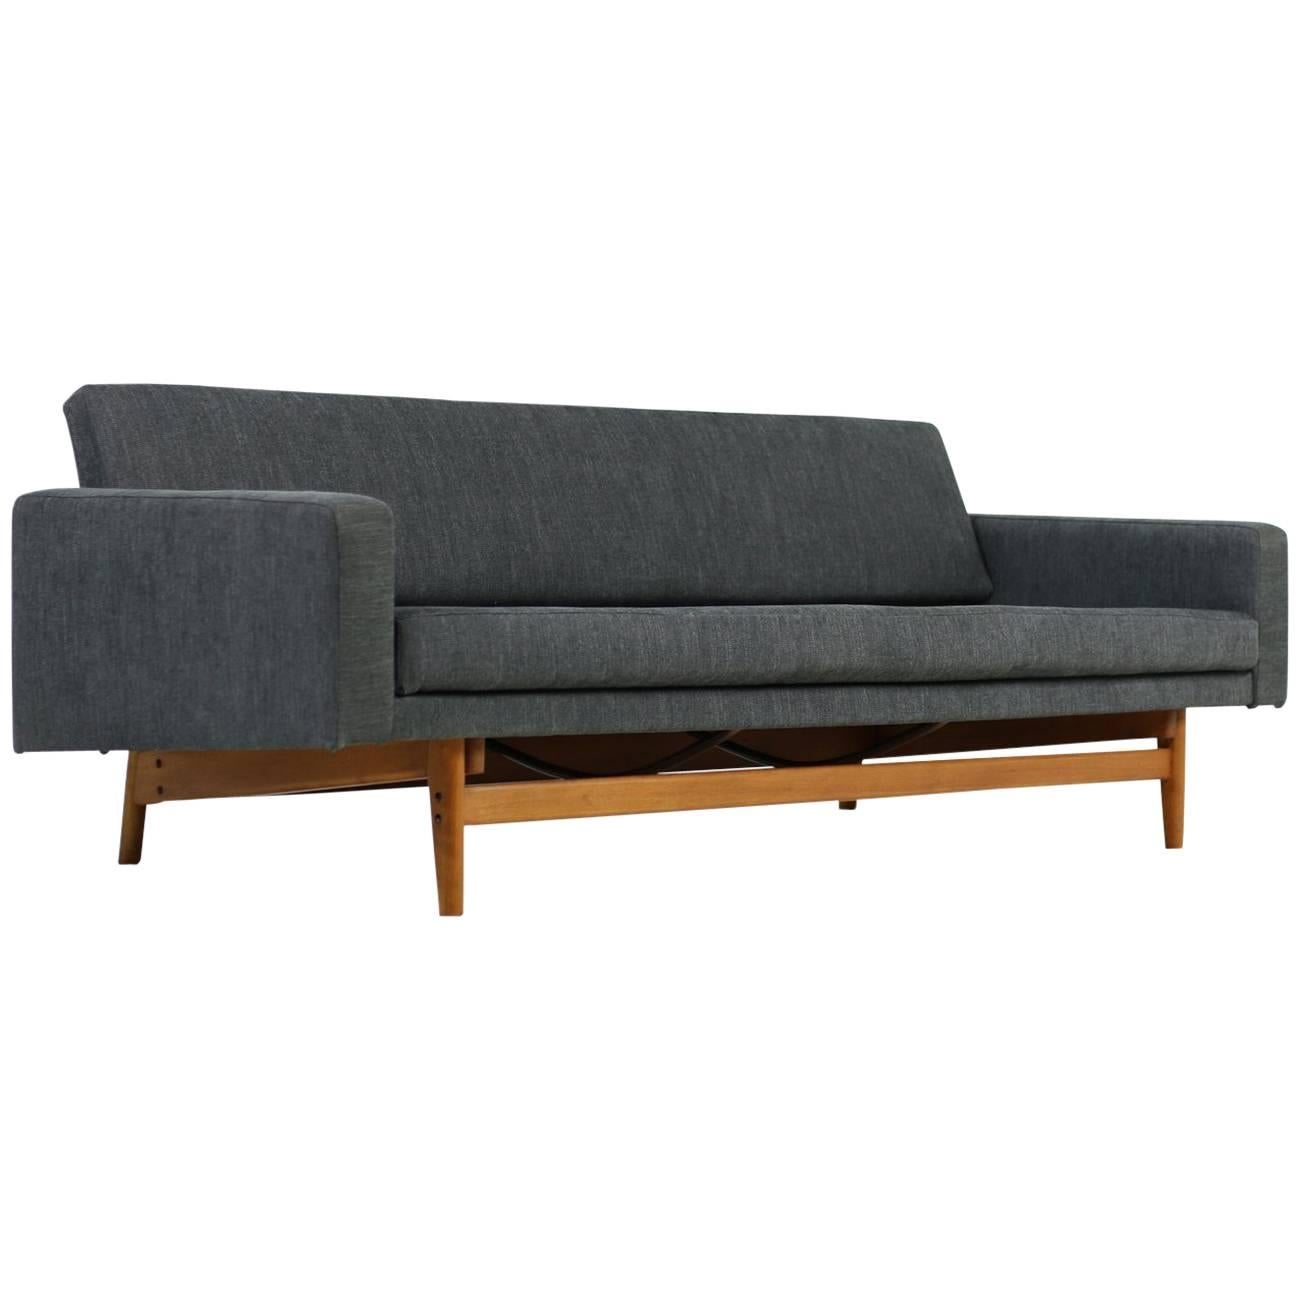 Very rare 1960s sofa/daybed by Karl Erik Ekselius for JOC Sweden, very rare model, restored. Beechwood frame in very good condition, the upholstery was renewed and covered with a very high quality cotton/linen fabric in dark grey, freestanding,